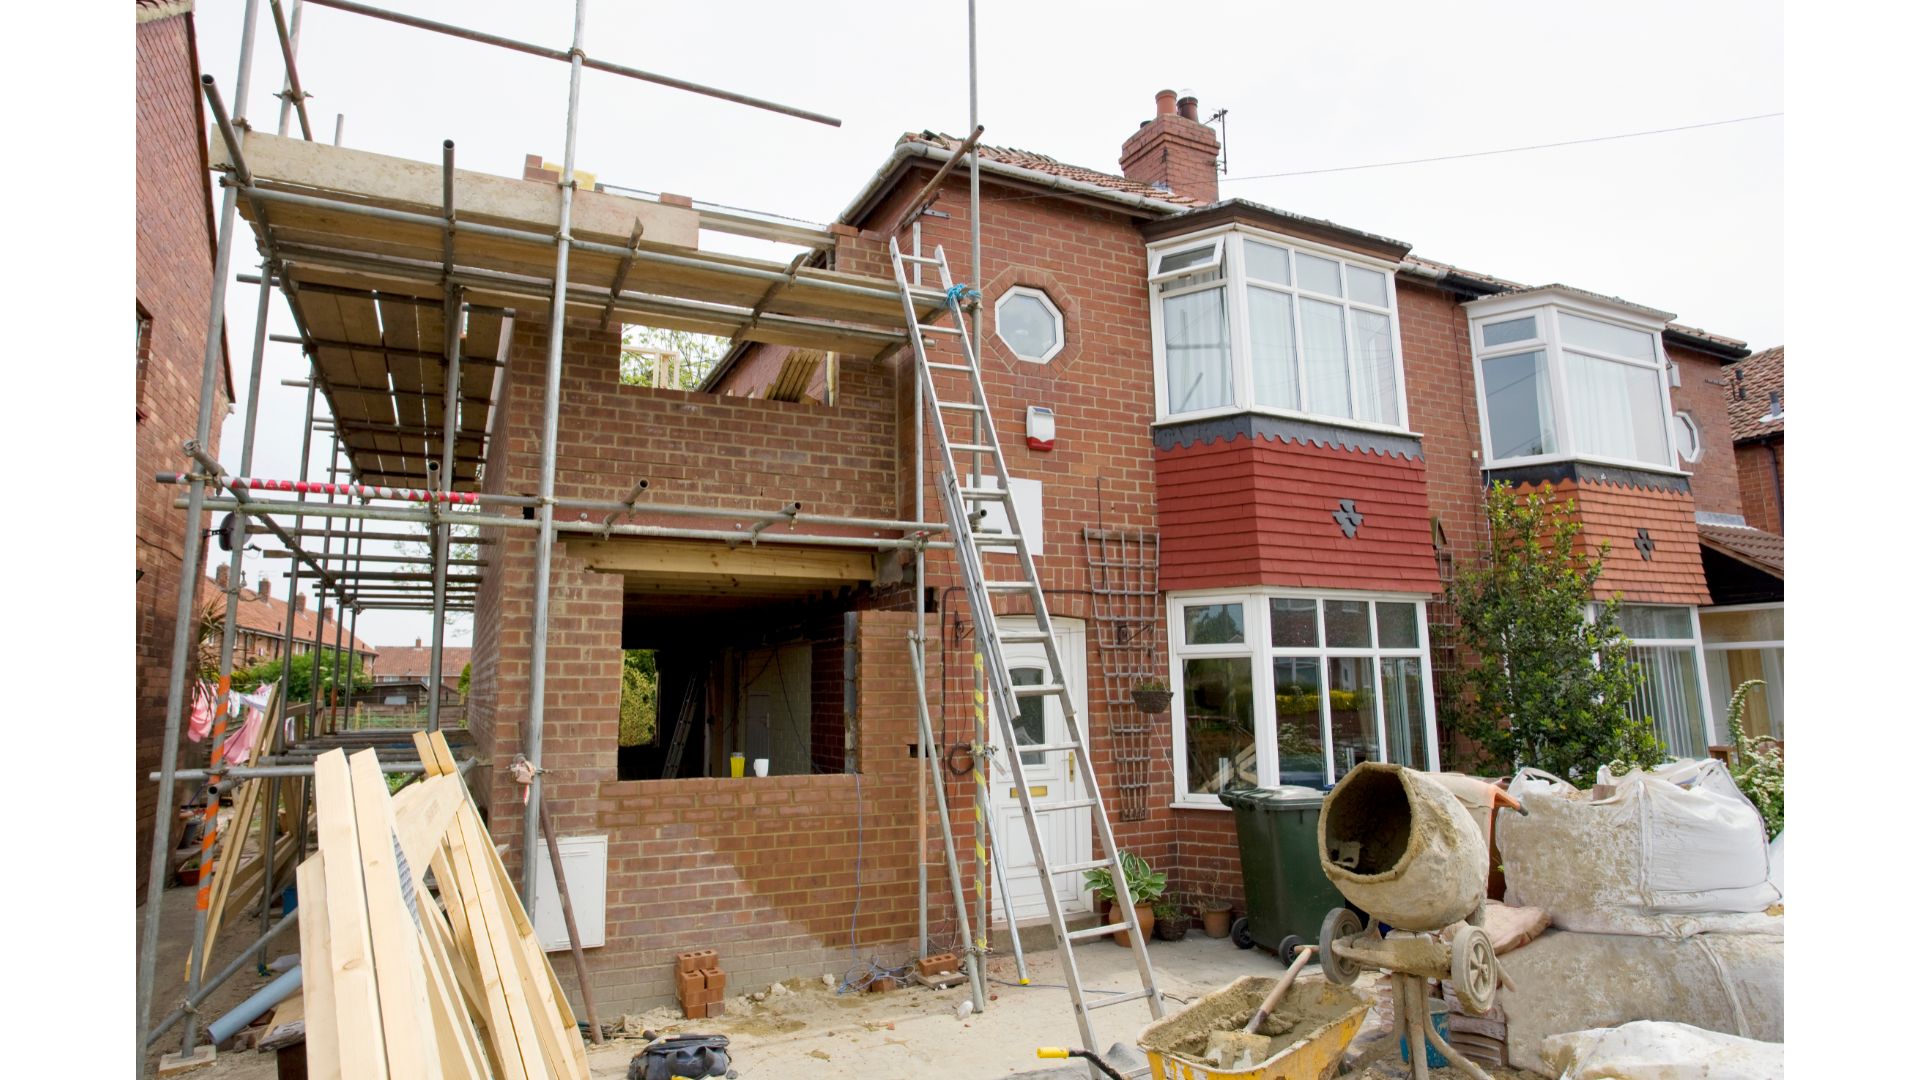 2 STOREY HOUSE EXTENSION